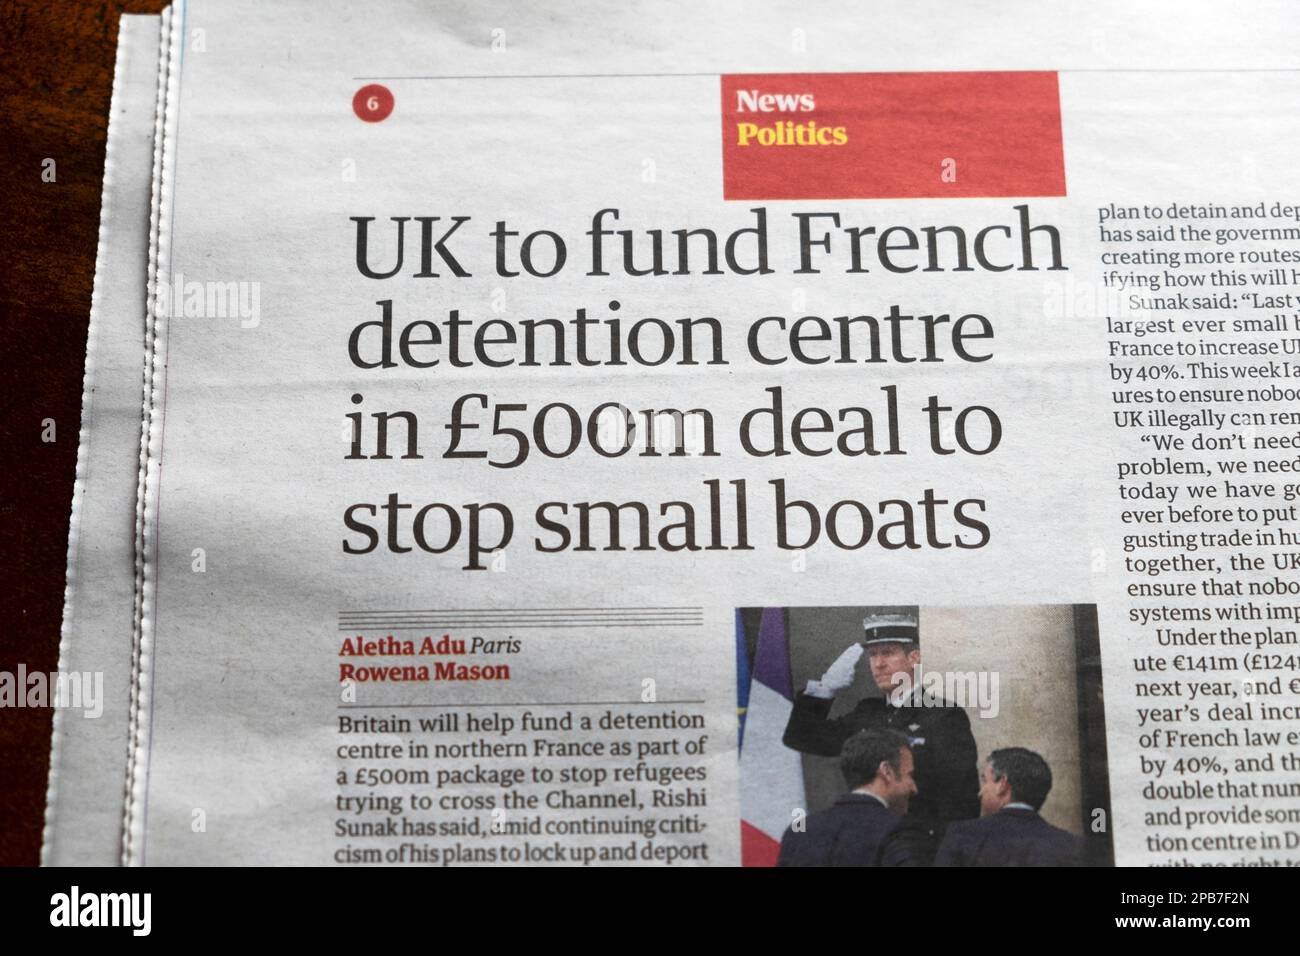 'UK to fund French detention centre in £500m deal to stop small boats' Guardian newspaper headline migrants migration article 11 March 2023 London UK Stock Photo